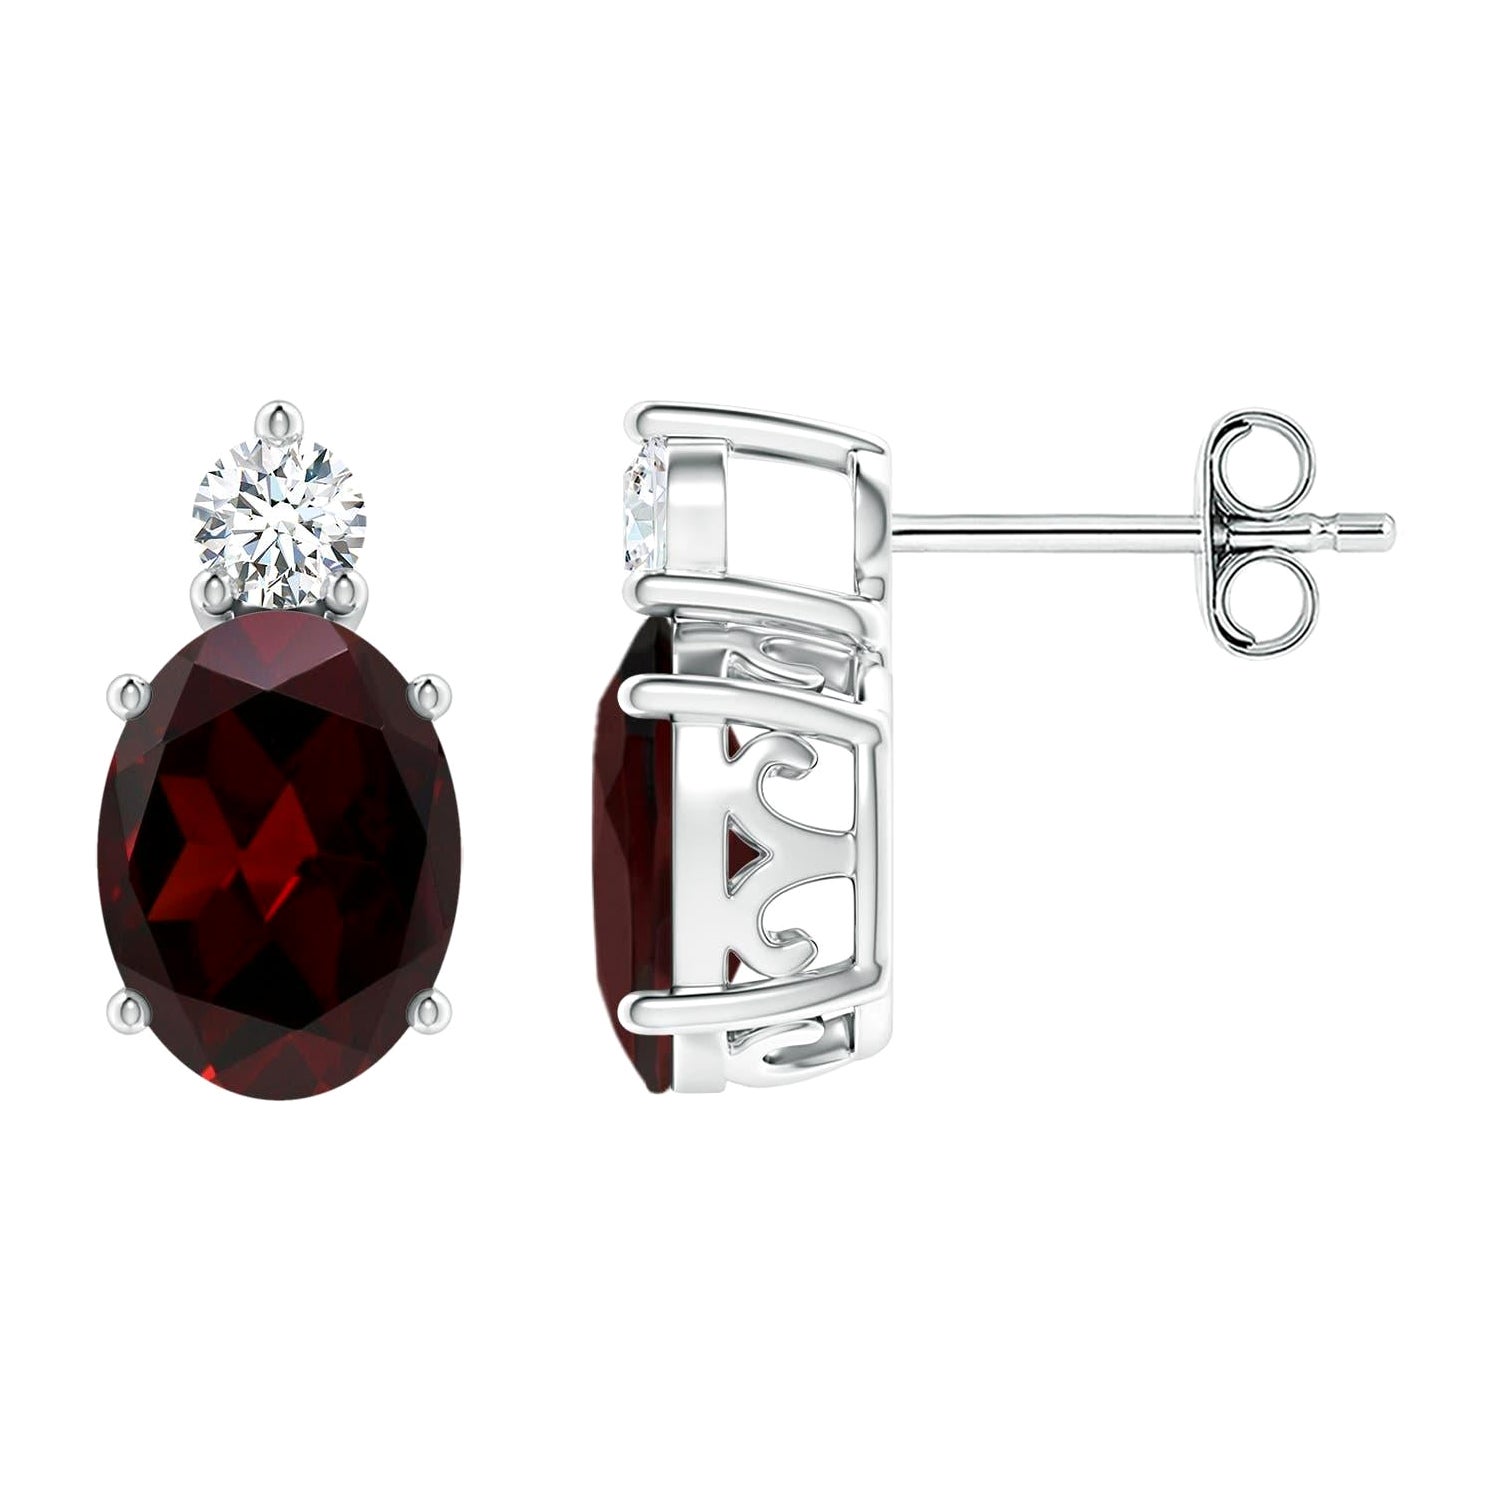 Natural Oval 2.9ct Garnet Stud Earrings with Diamond in 925 Sterling Silver For Sale